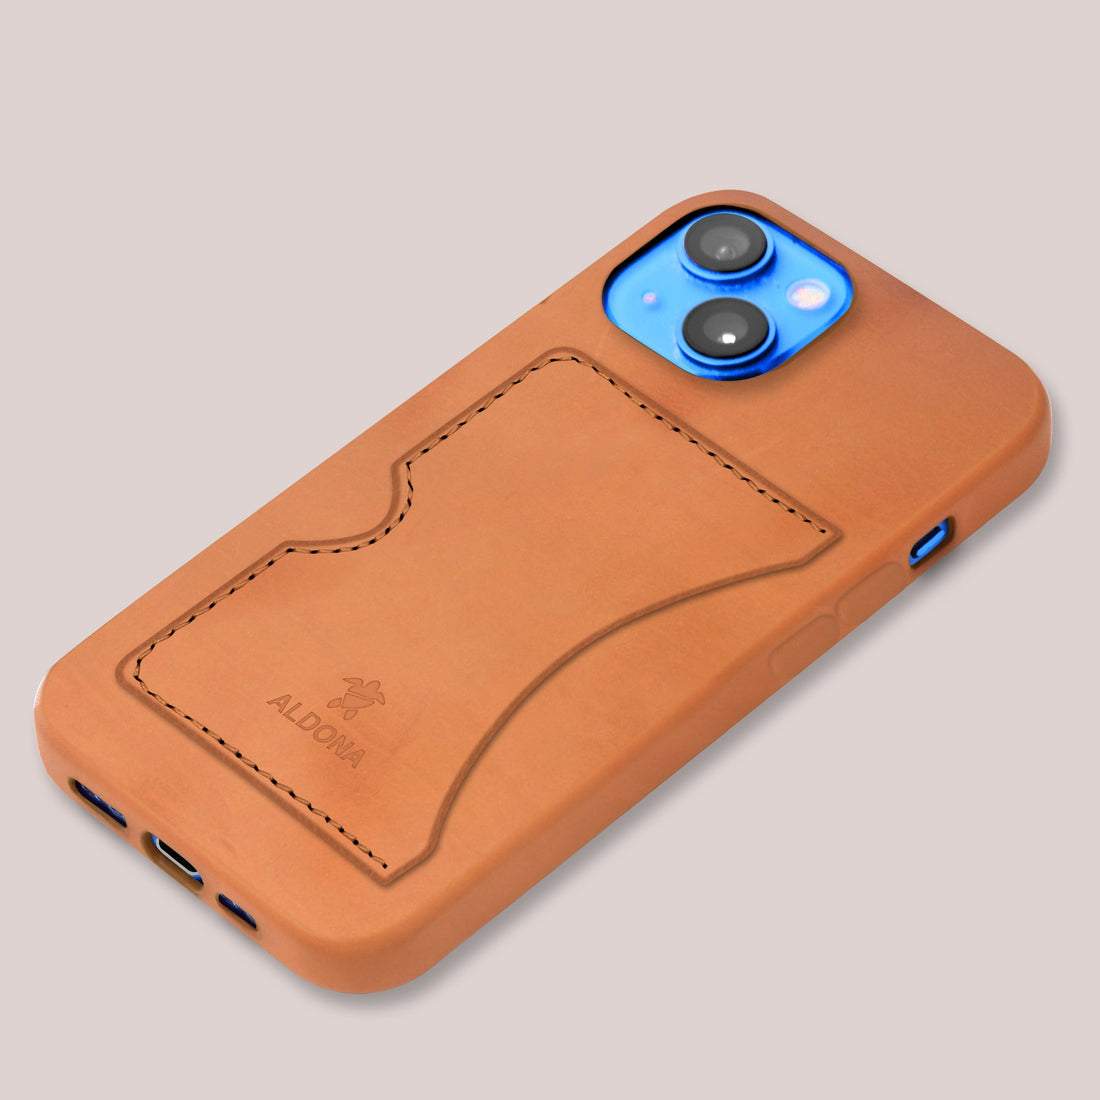 Baxter Card Case for iPhone 13 Pro Max - Cognac